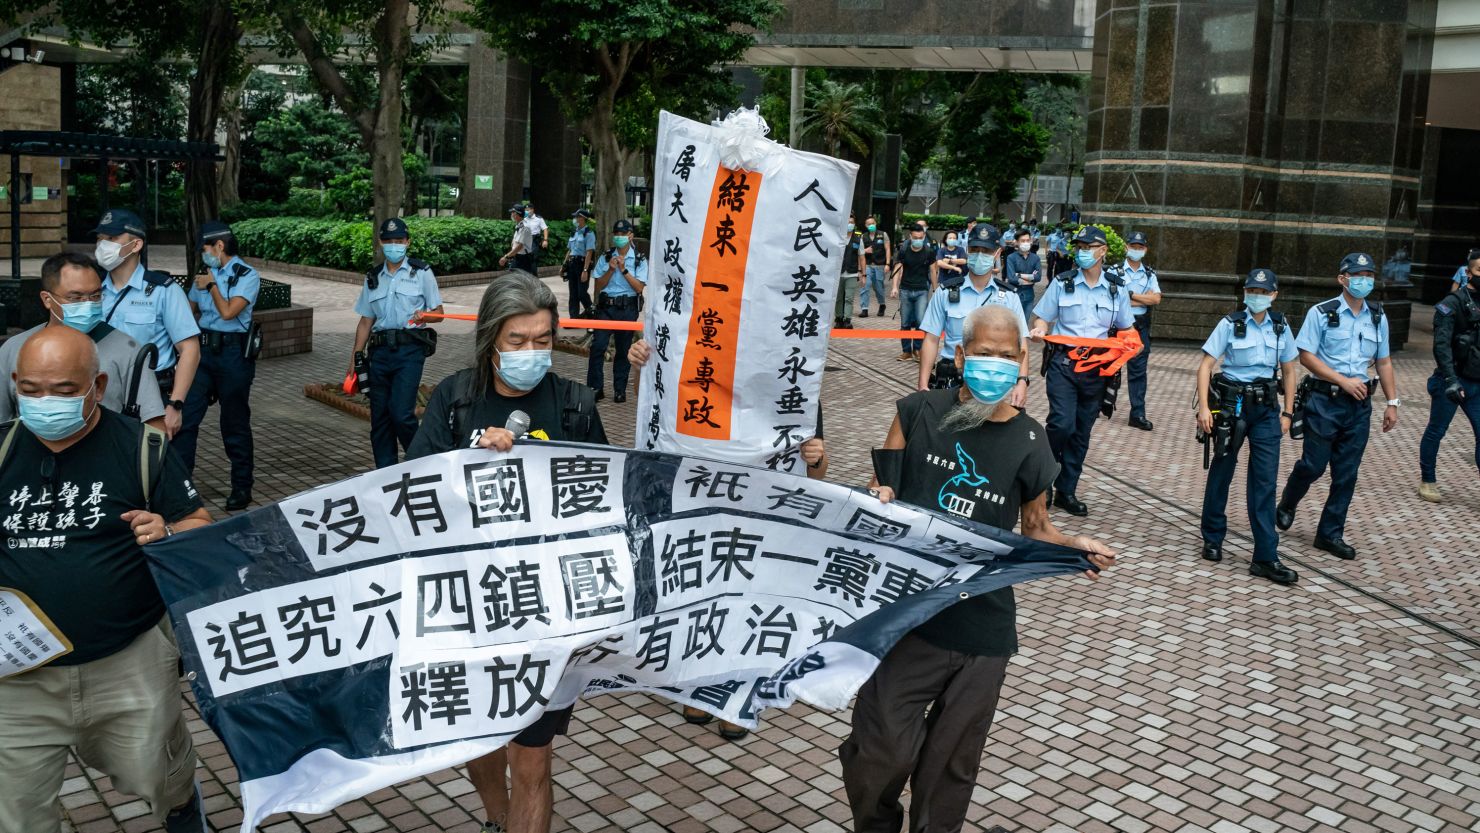 Members of the pro-democracy group Civil Human Rights Front take part in a march toward the flag raising venue ahead of the National Day ceremony on October 1, 2020, in Hong Kong.